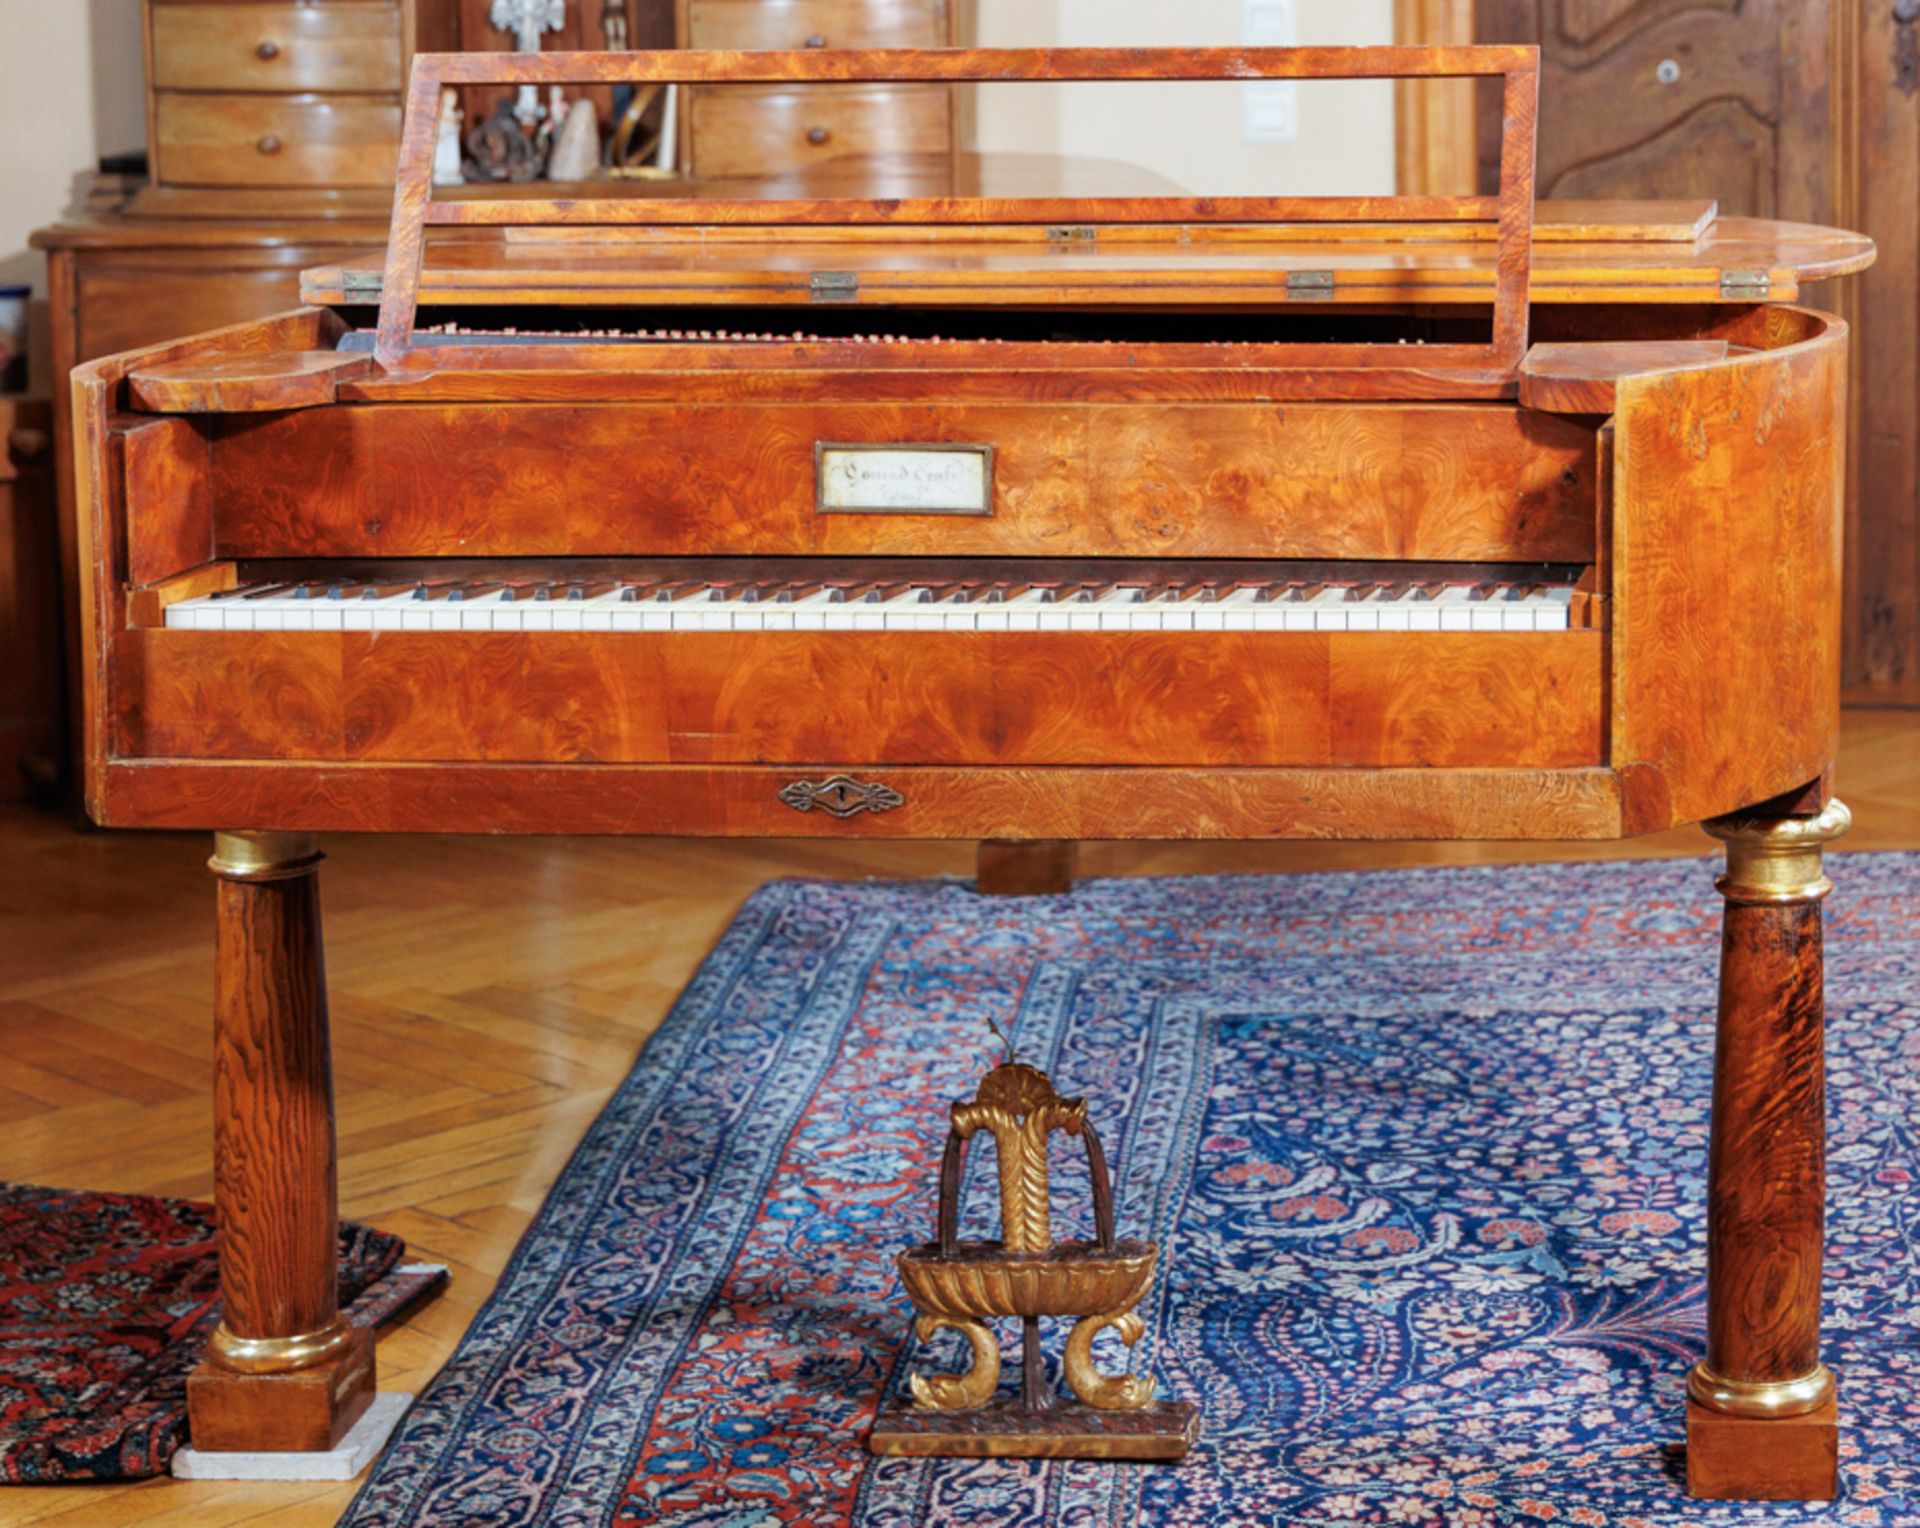 FORTEPIANO SIGNED „C. GRAF“, PROBABLY VIENNA 1820-1830 - Image 3 of 5